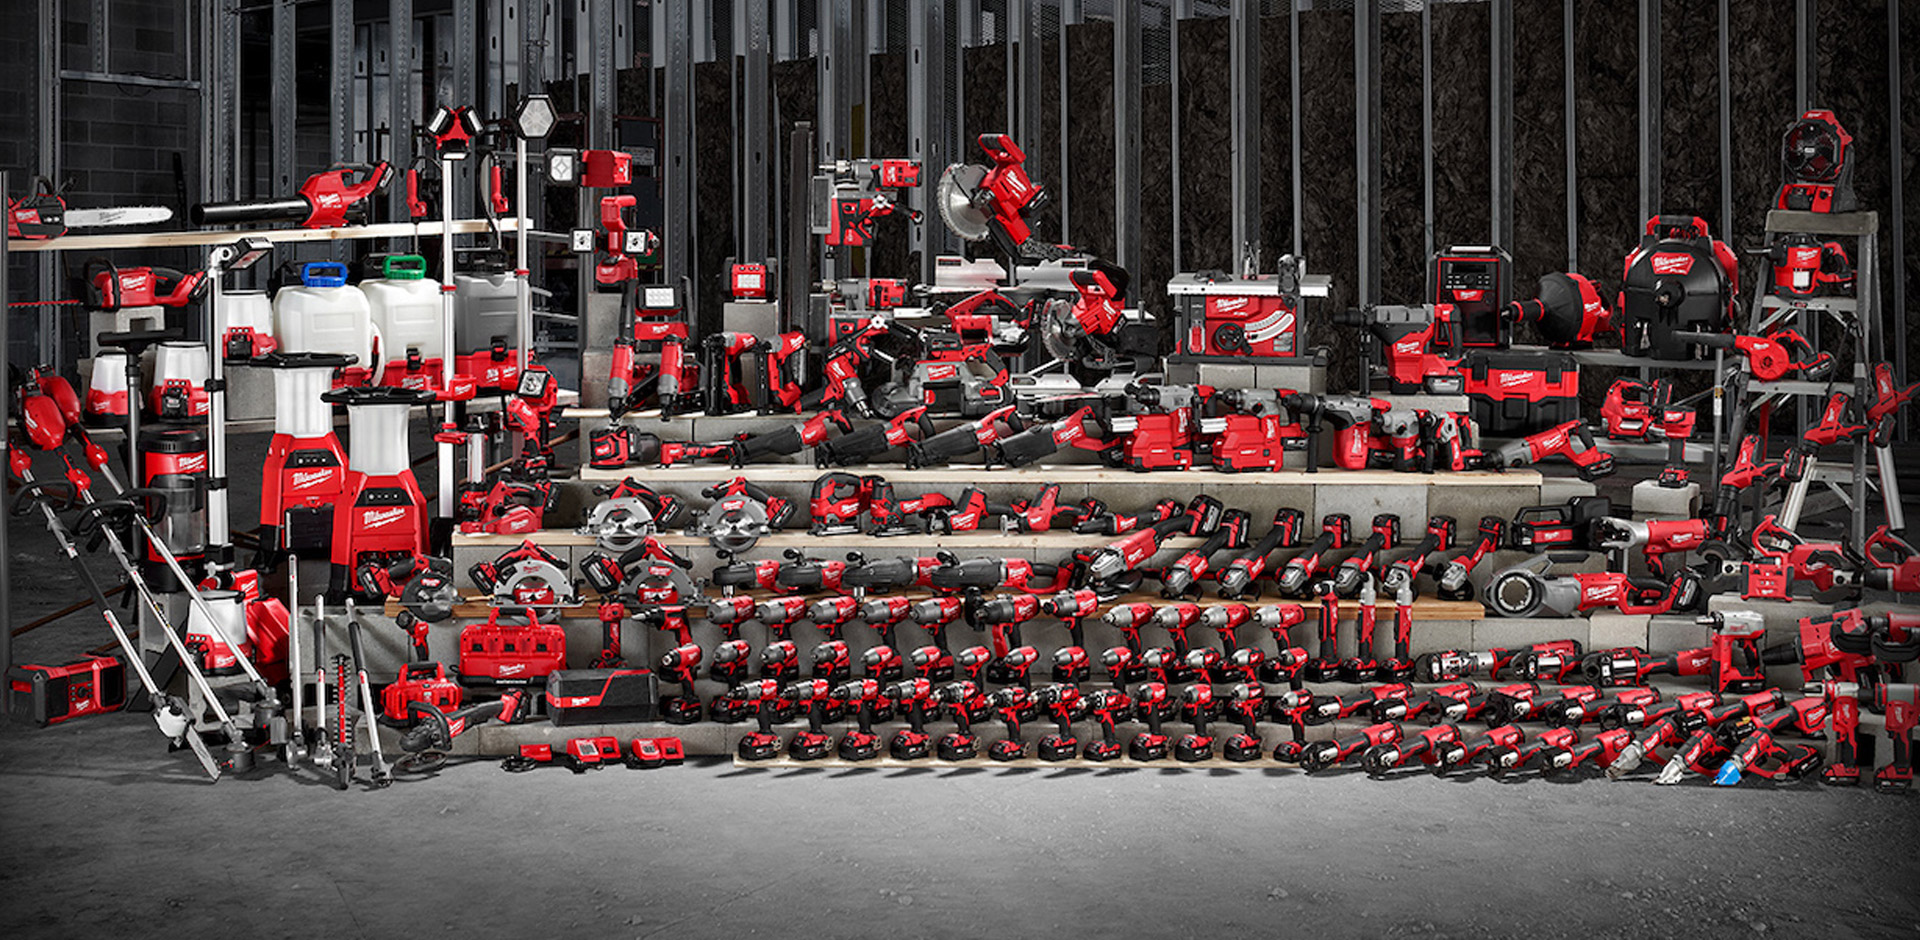 NEW Milwaukee Tools from Pipeline 2023 - Impact Wrenches, Pliers